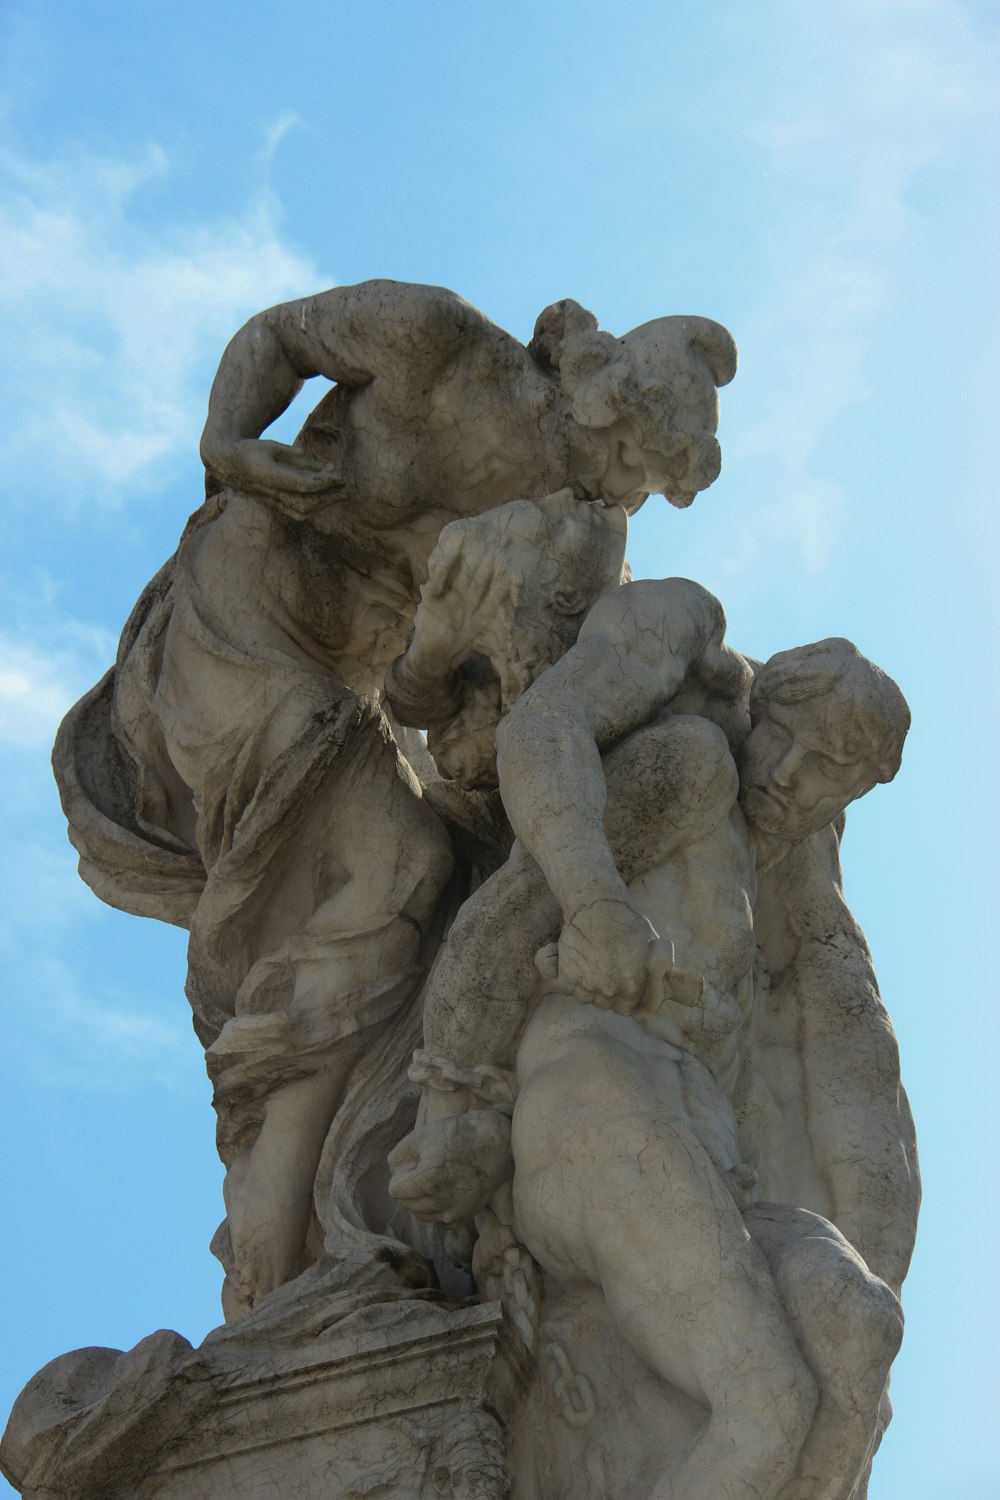 a statue of a man holding a woman